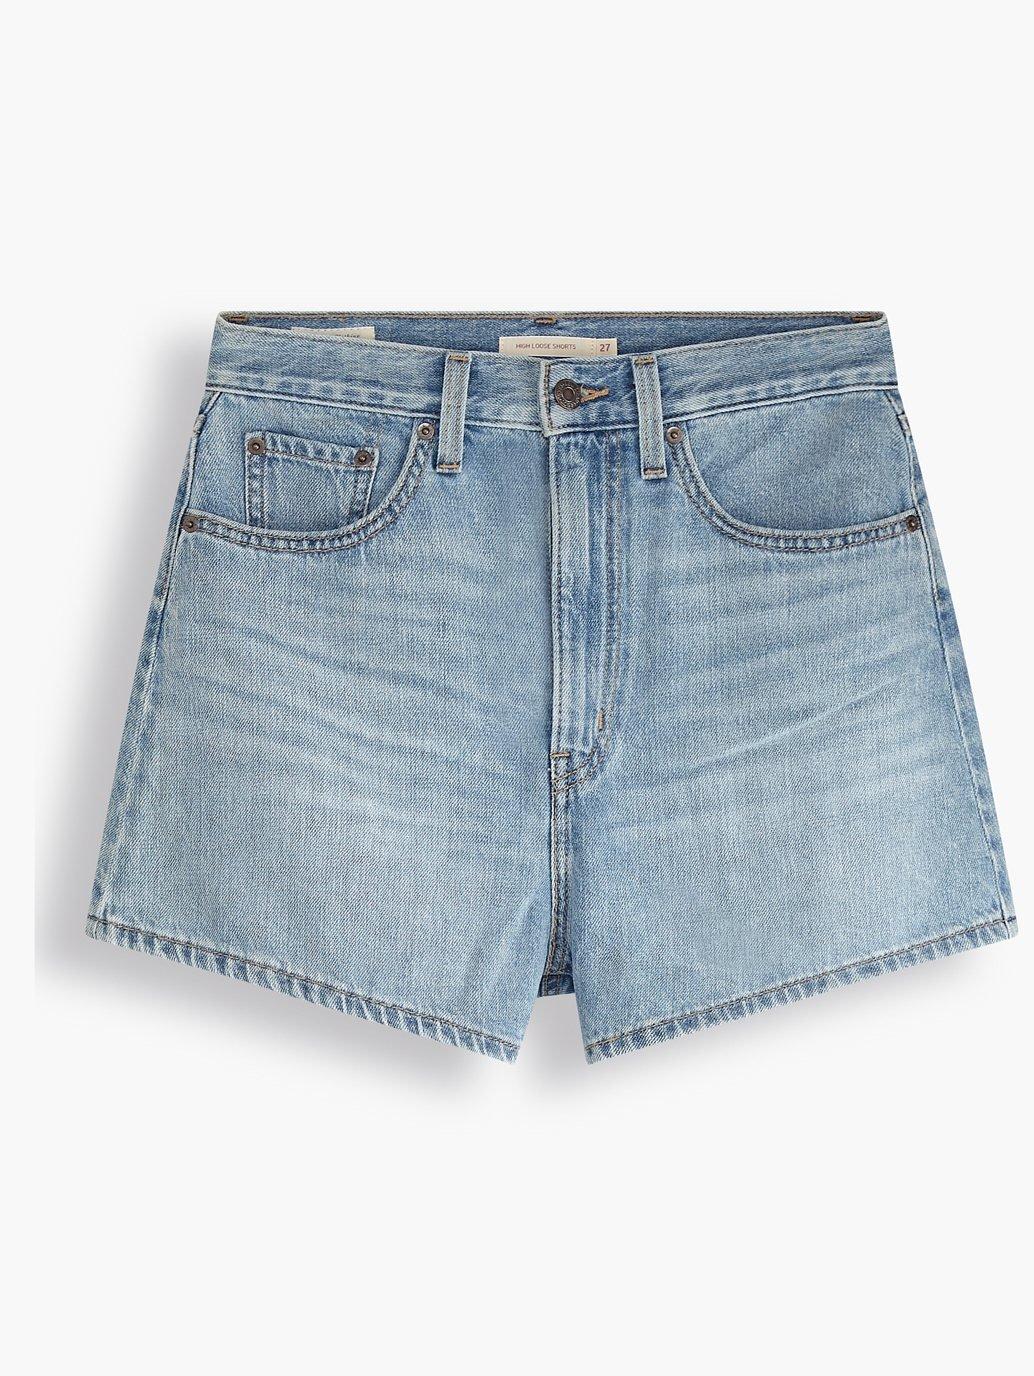 levis malaysia womens high loose shorts 394510009 21 Details